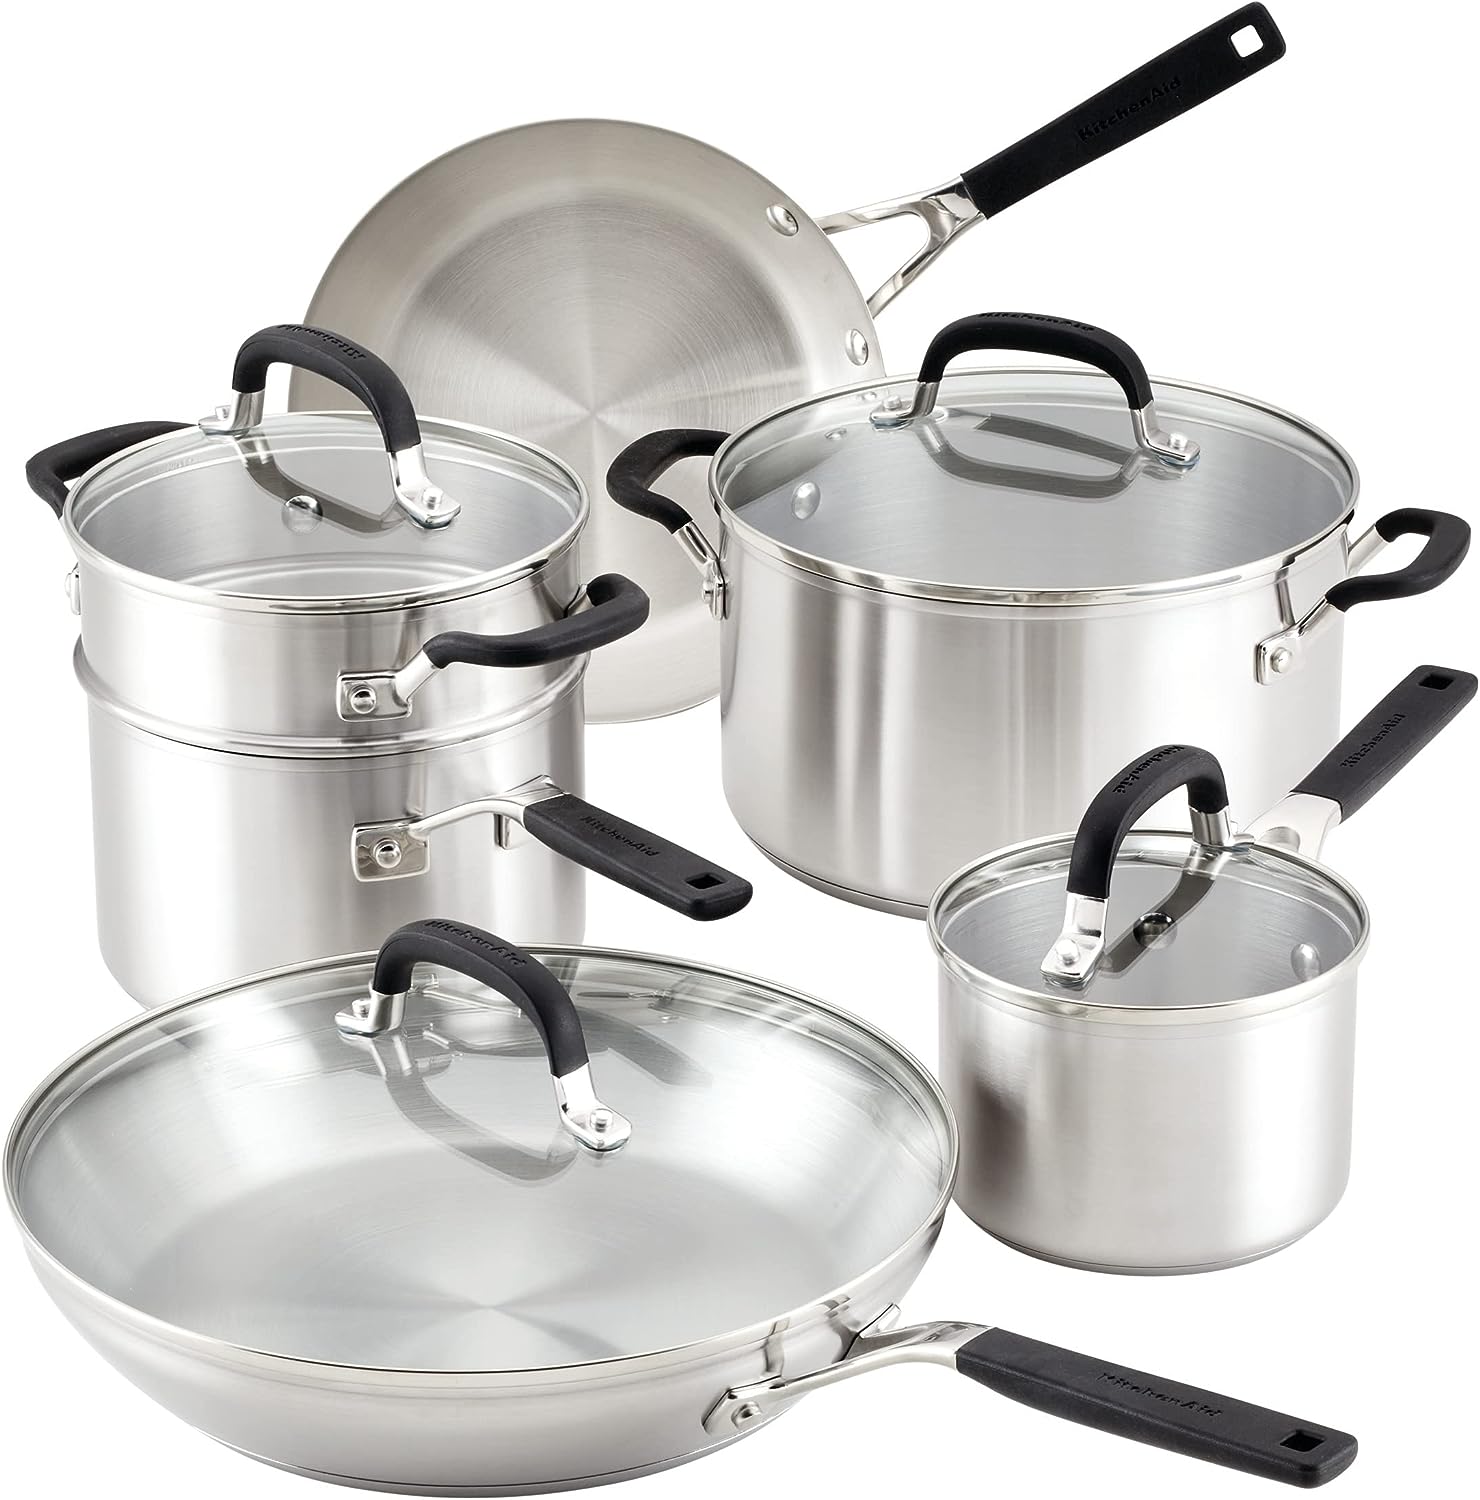 https://bigbigmart.com/wp-content/uploads/2023/12/KitchenAid-Stainless-Steel-Cookware-Pots-and-Pans-Set-10-Piece-Brushed-Stainless-Steel.jpg